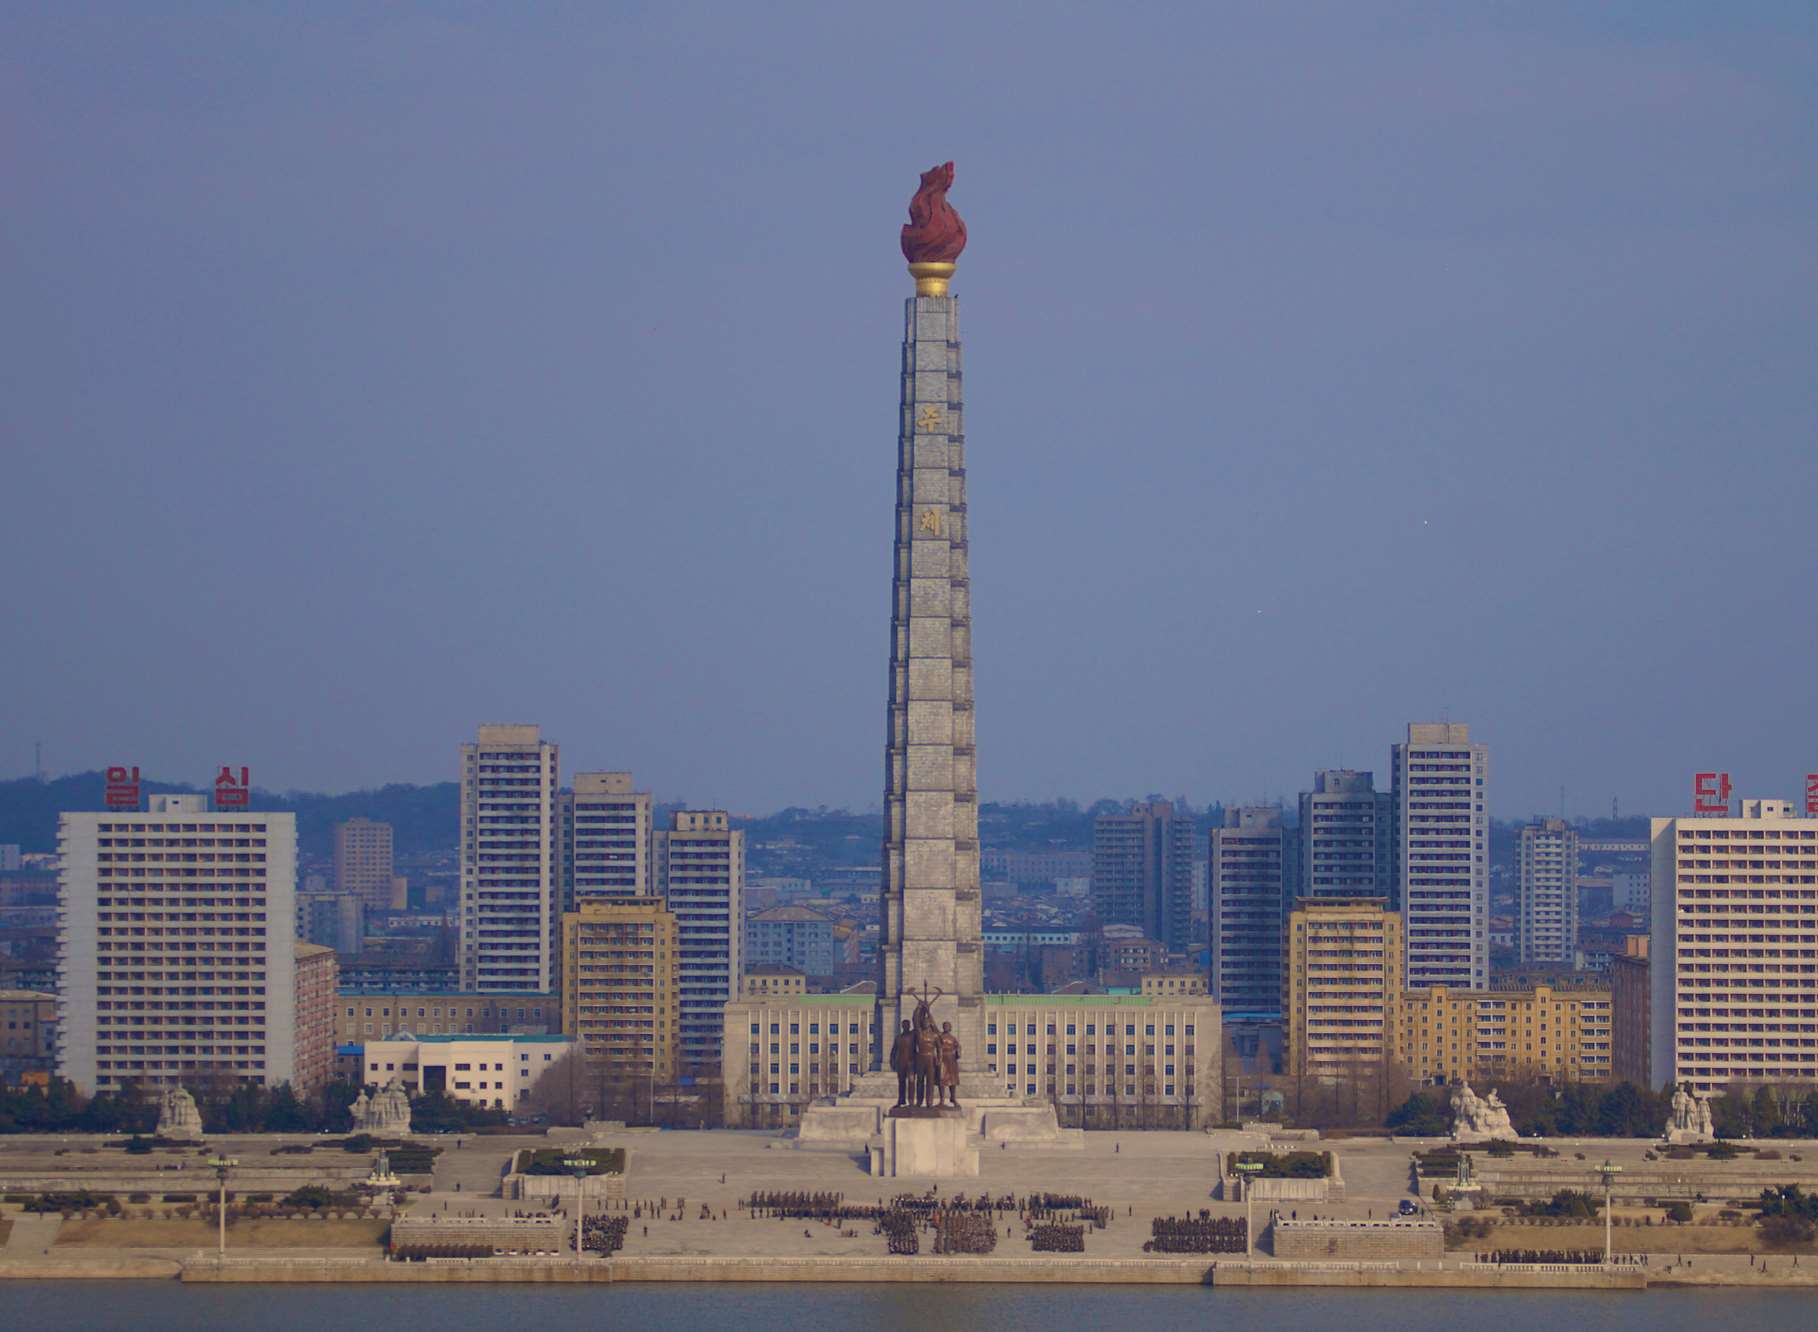 The Juche Tower, a monument in Pyongyang, the capital of North Korea. Picture: Young Pioneer Tours.